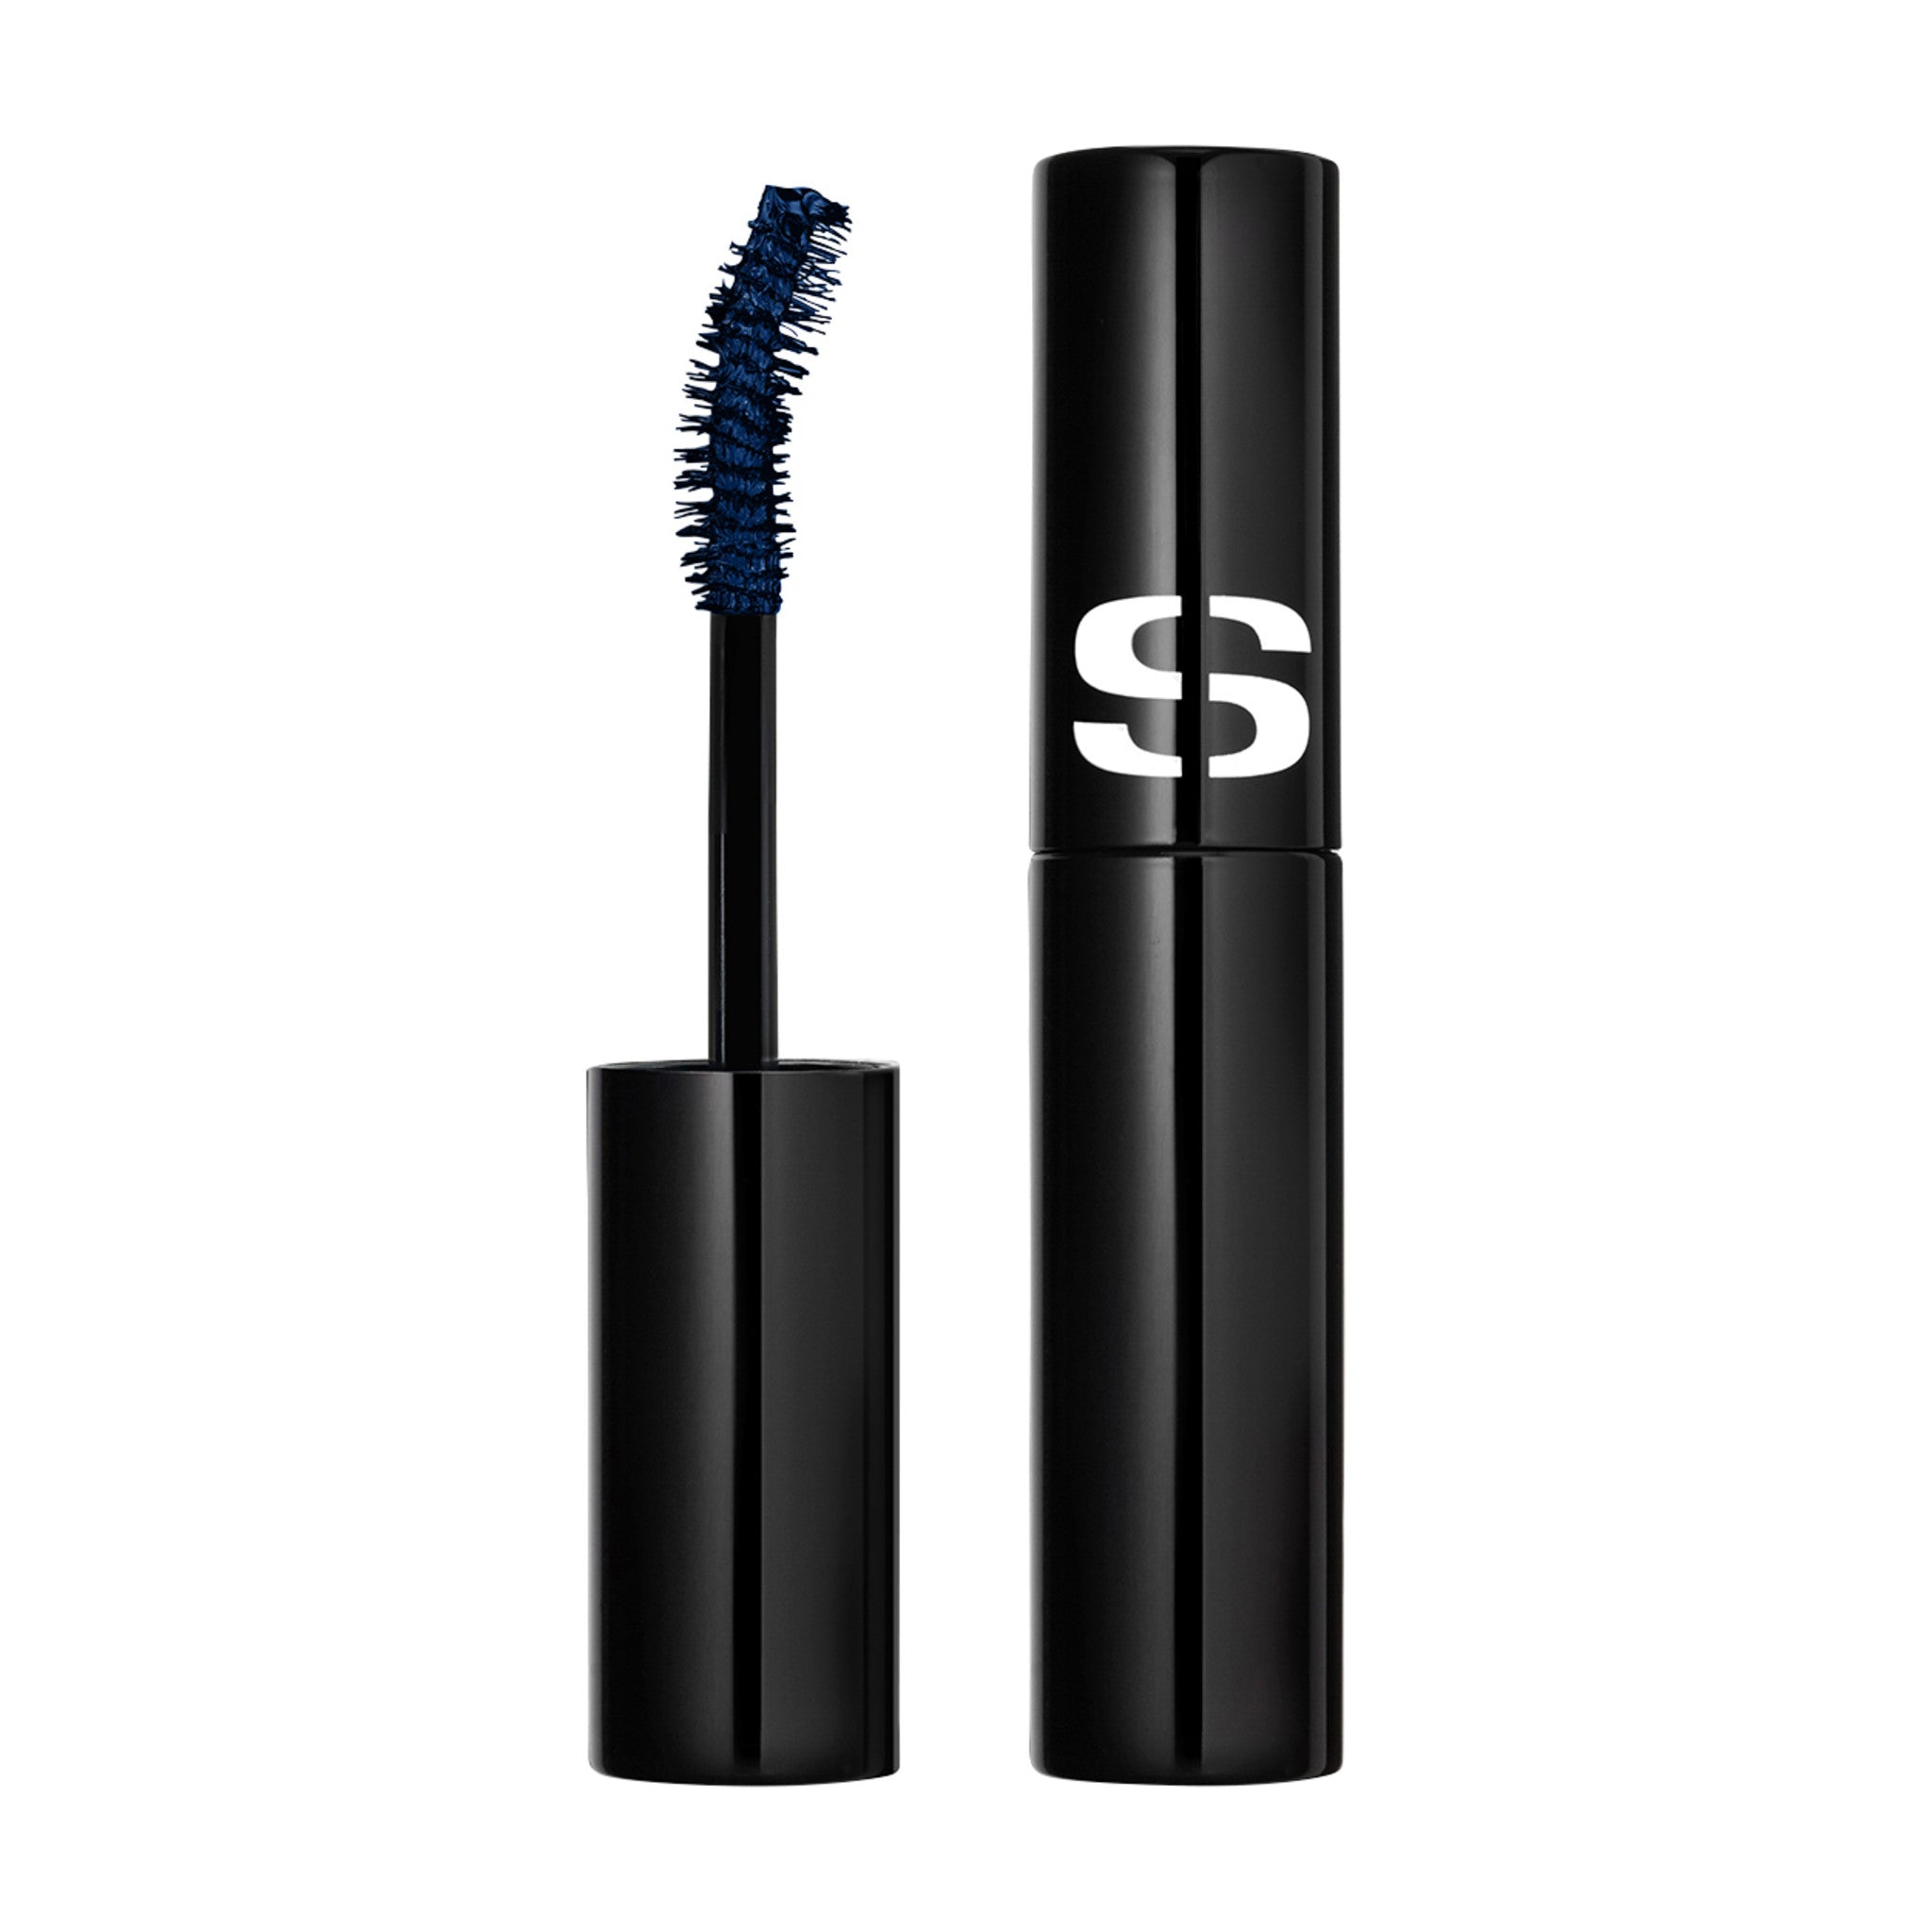 Sisley-Paris So Curl Mascara Color/Shade variant: 3 Deep Blue main image. This product is in the color blue